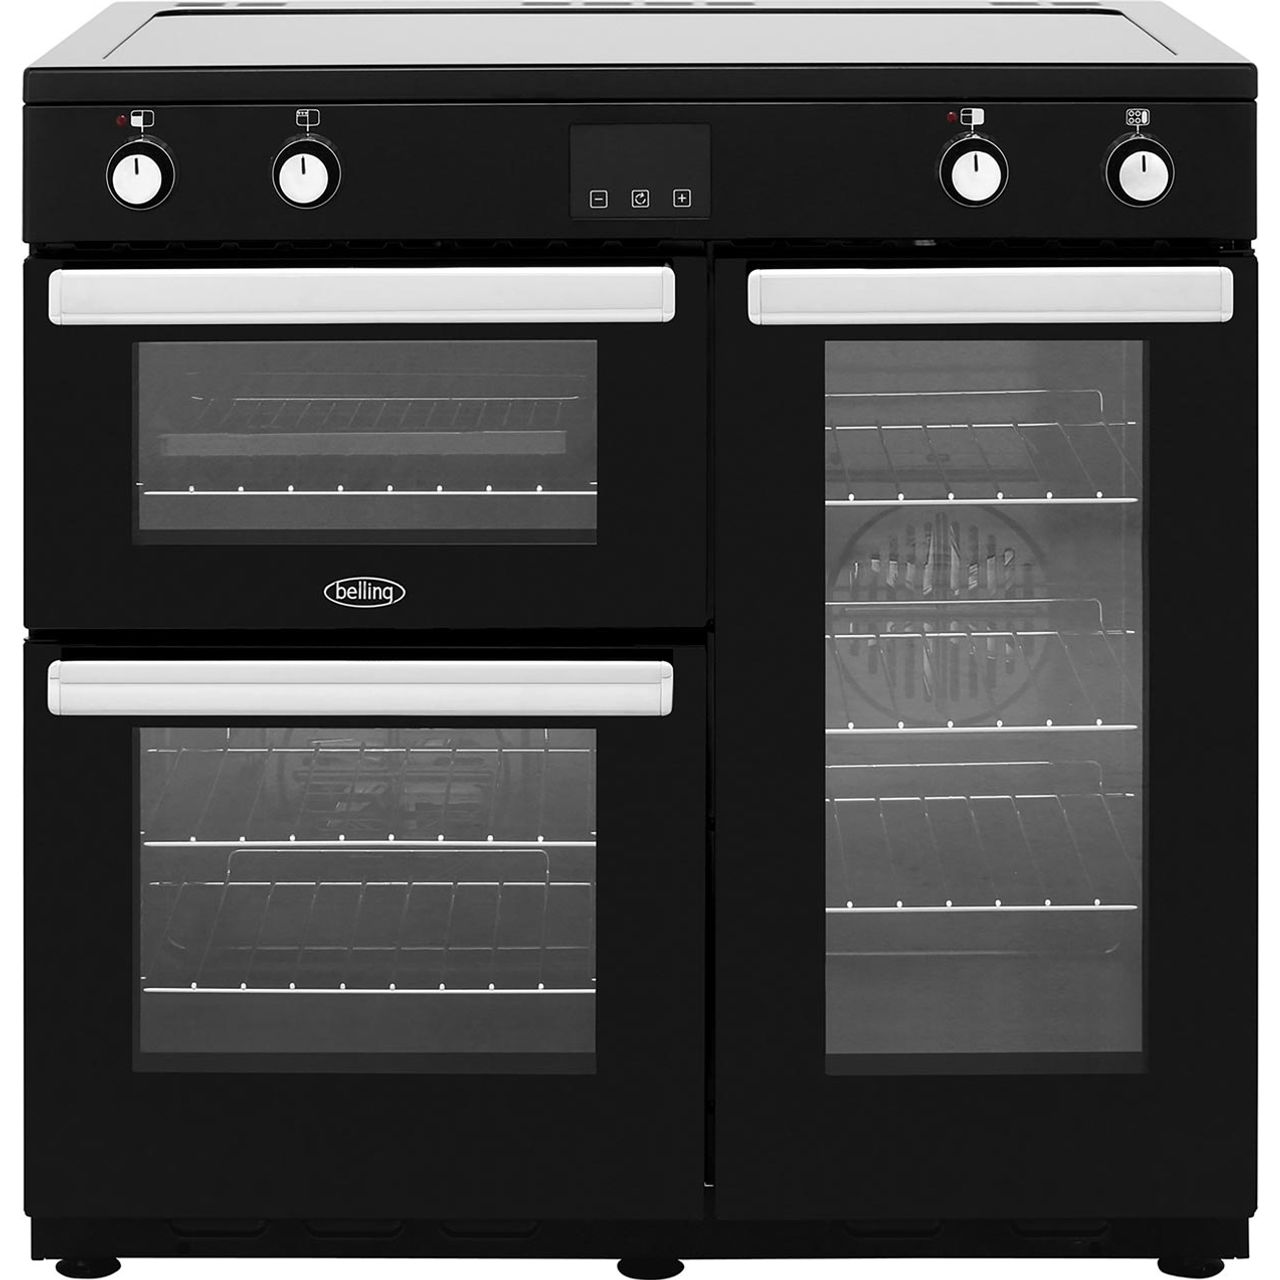 Belling Cookcentre90Ei 90cm Electric Range Cooker with Induction Hob Review